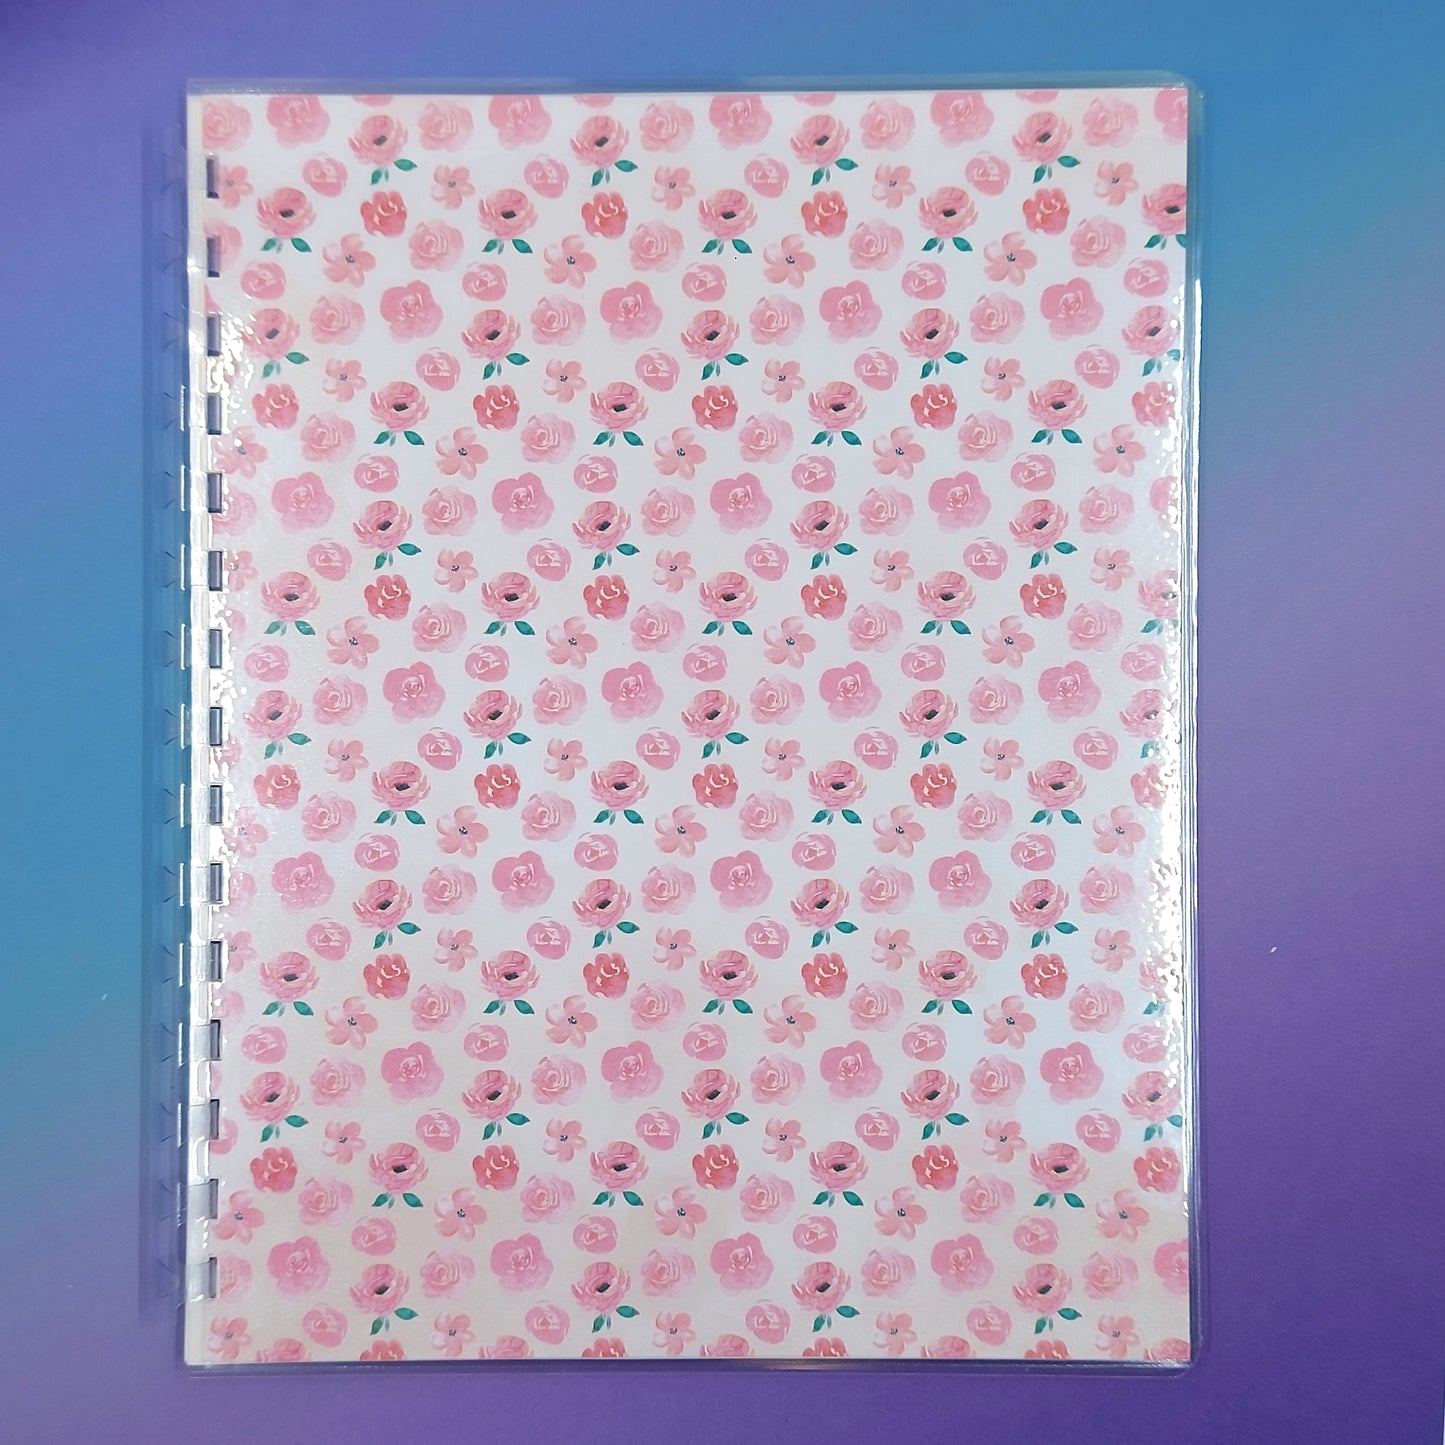 Large 7x9 Reusable Sticker Storage Book - Small Pink Flowers